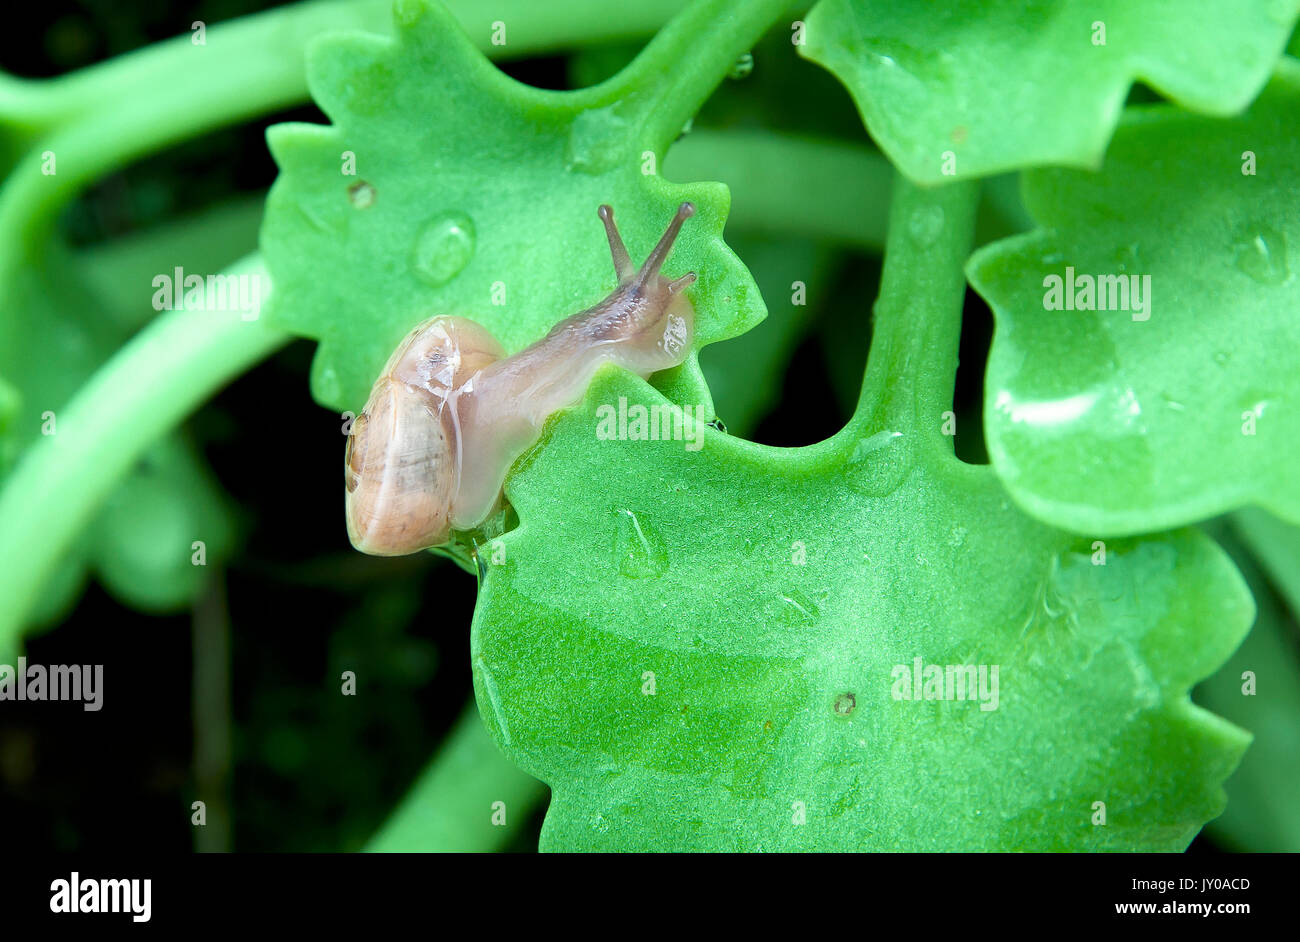 A snail upon a wet leaf Stock Photo